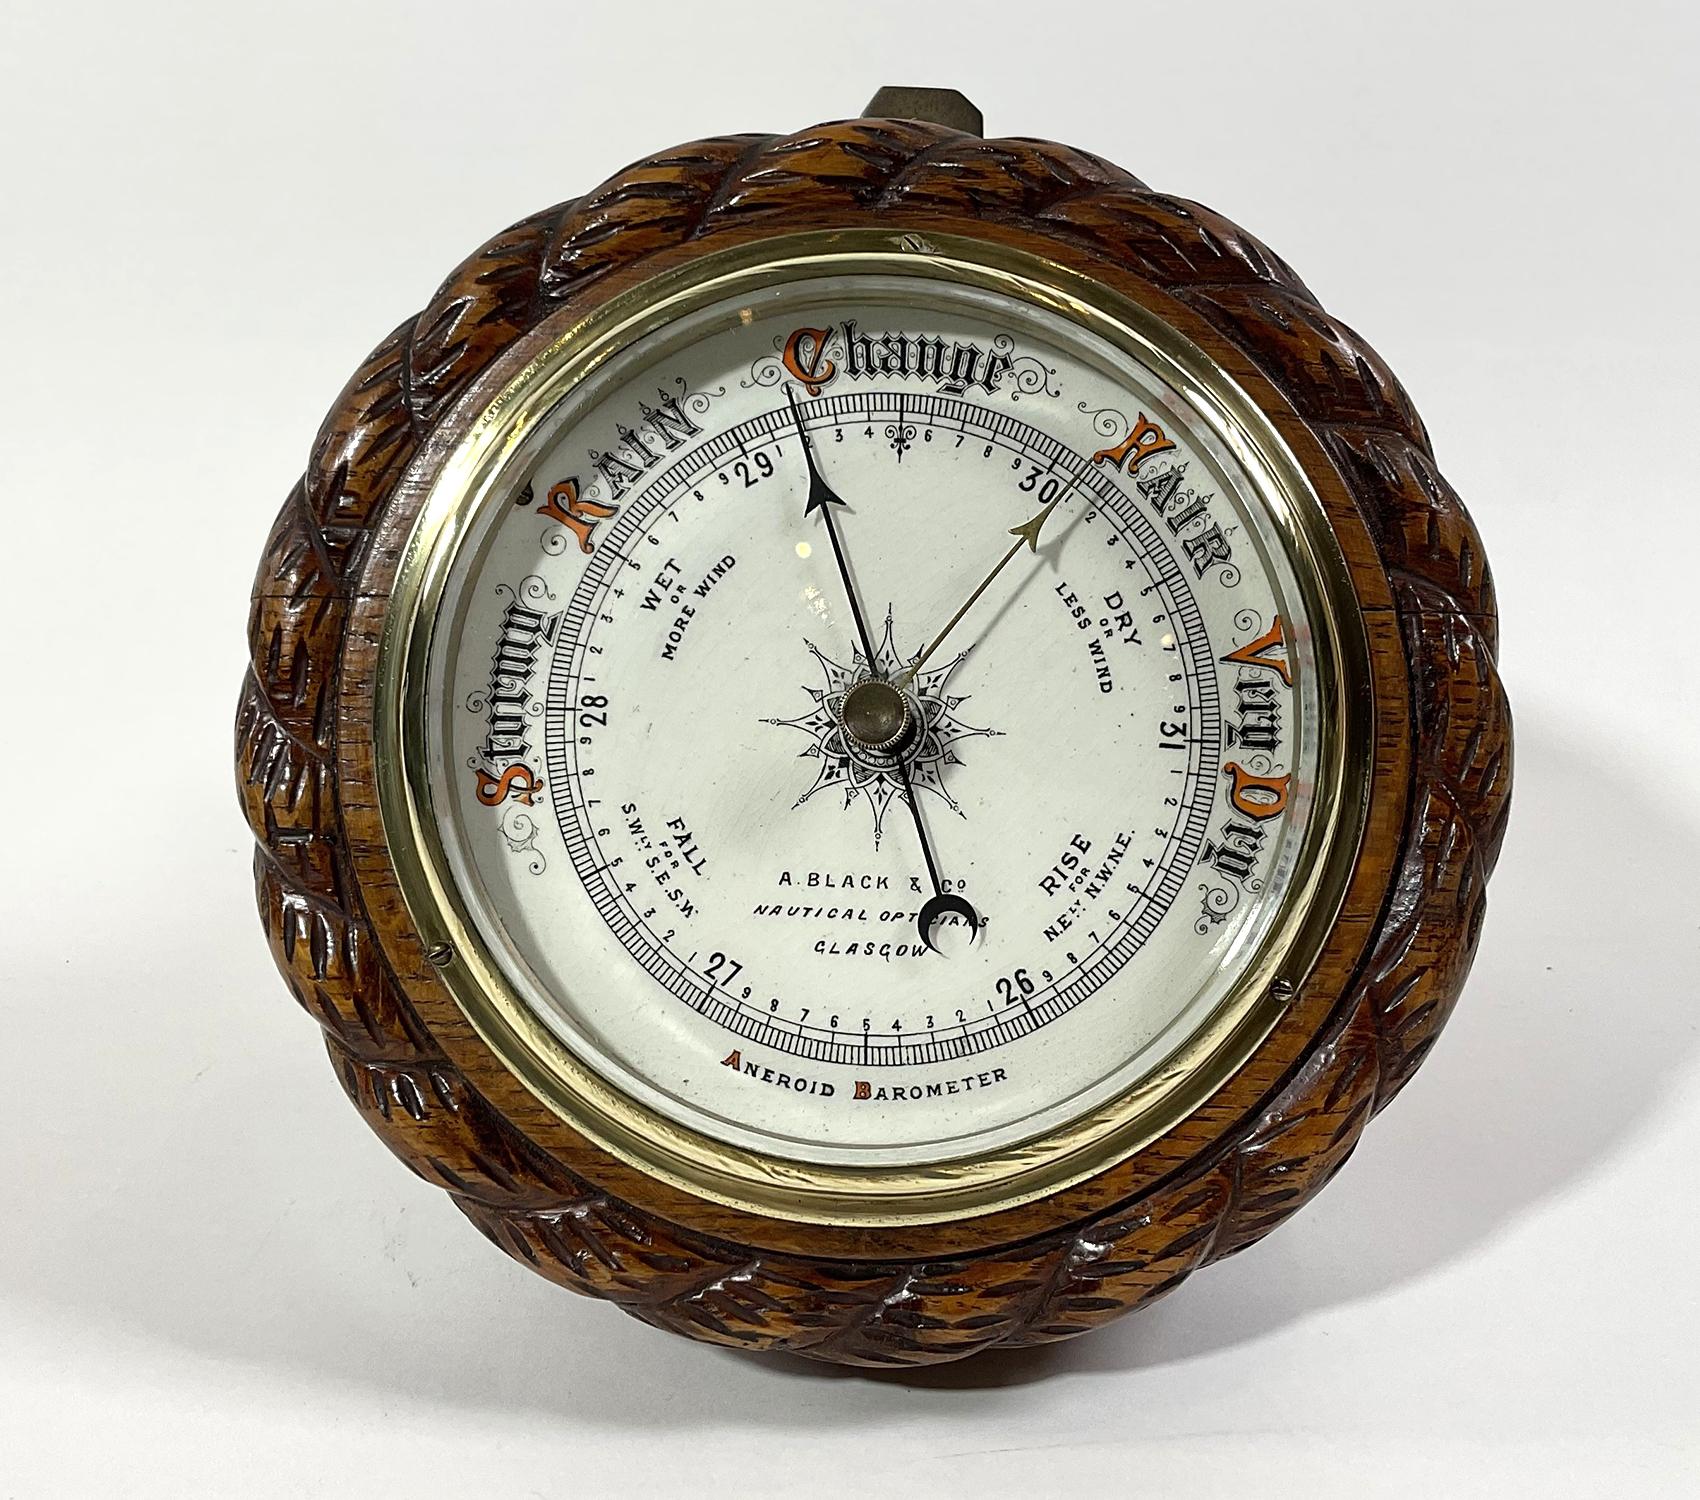 Early twentieth century barometer with porcelain face with merchants name A Black & Co., Nautical Optician, Glasgow. Carved rope twist case with brass bezel. Brass hanging tab. Nice nautical relic.